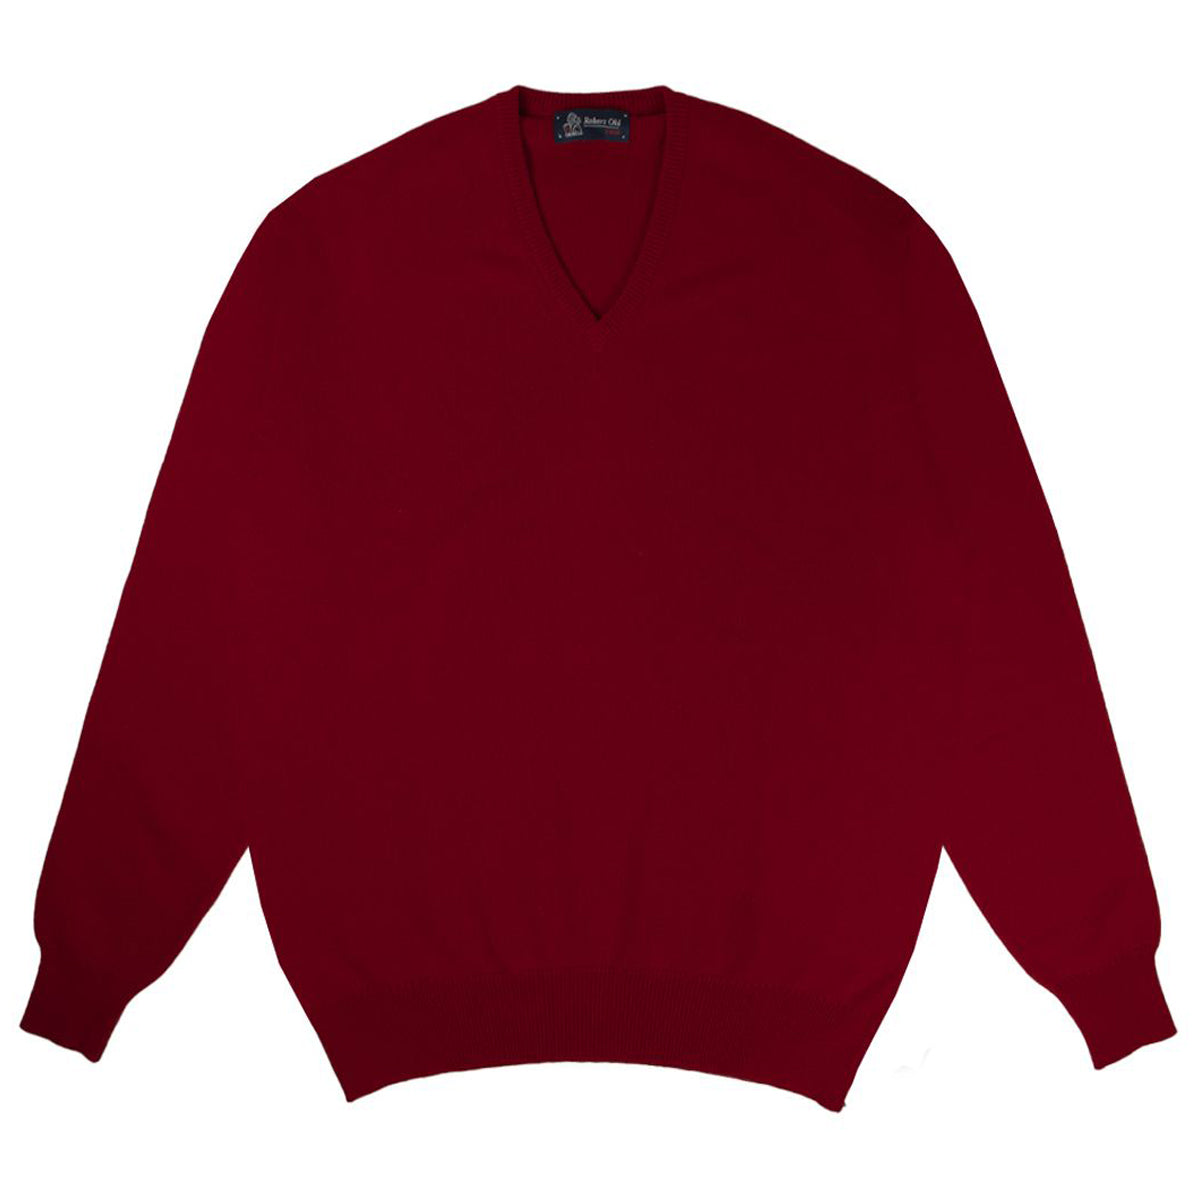 Ruby Red Tobermorey 4ply V-Neck Cashmere Sweater  Robert Old   